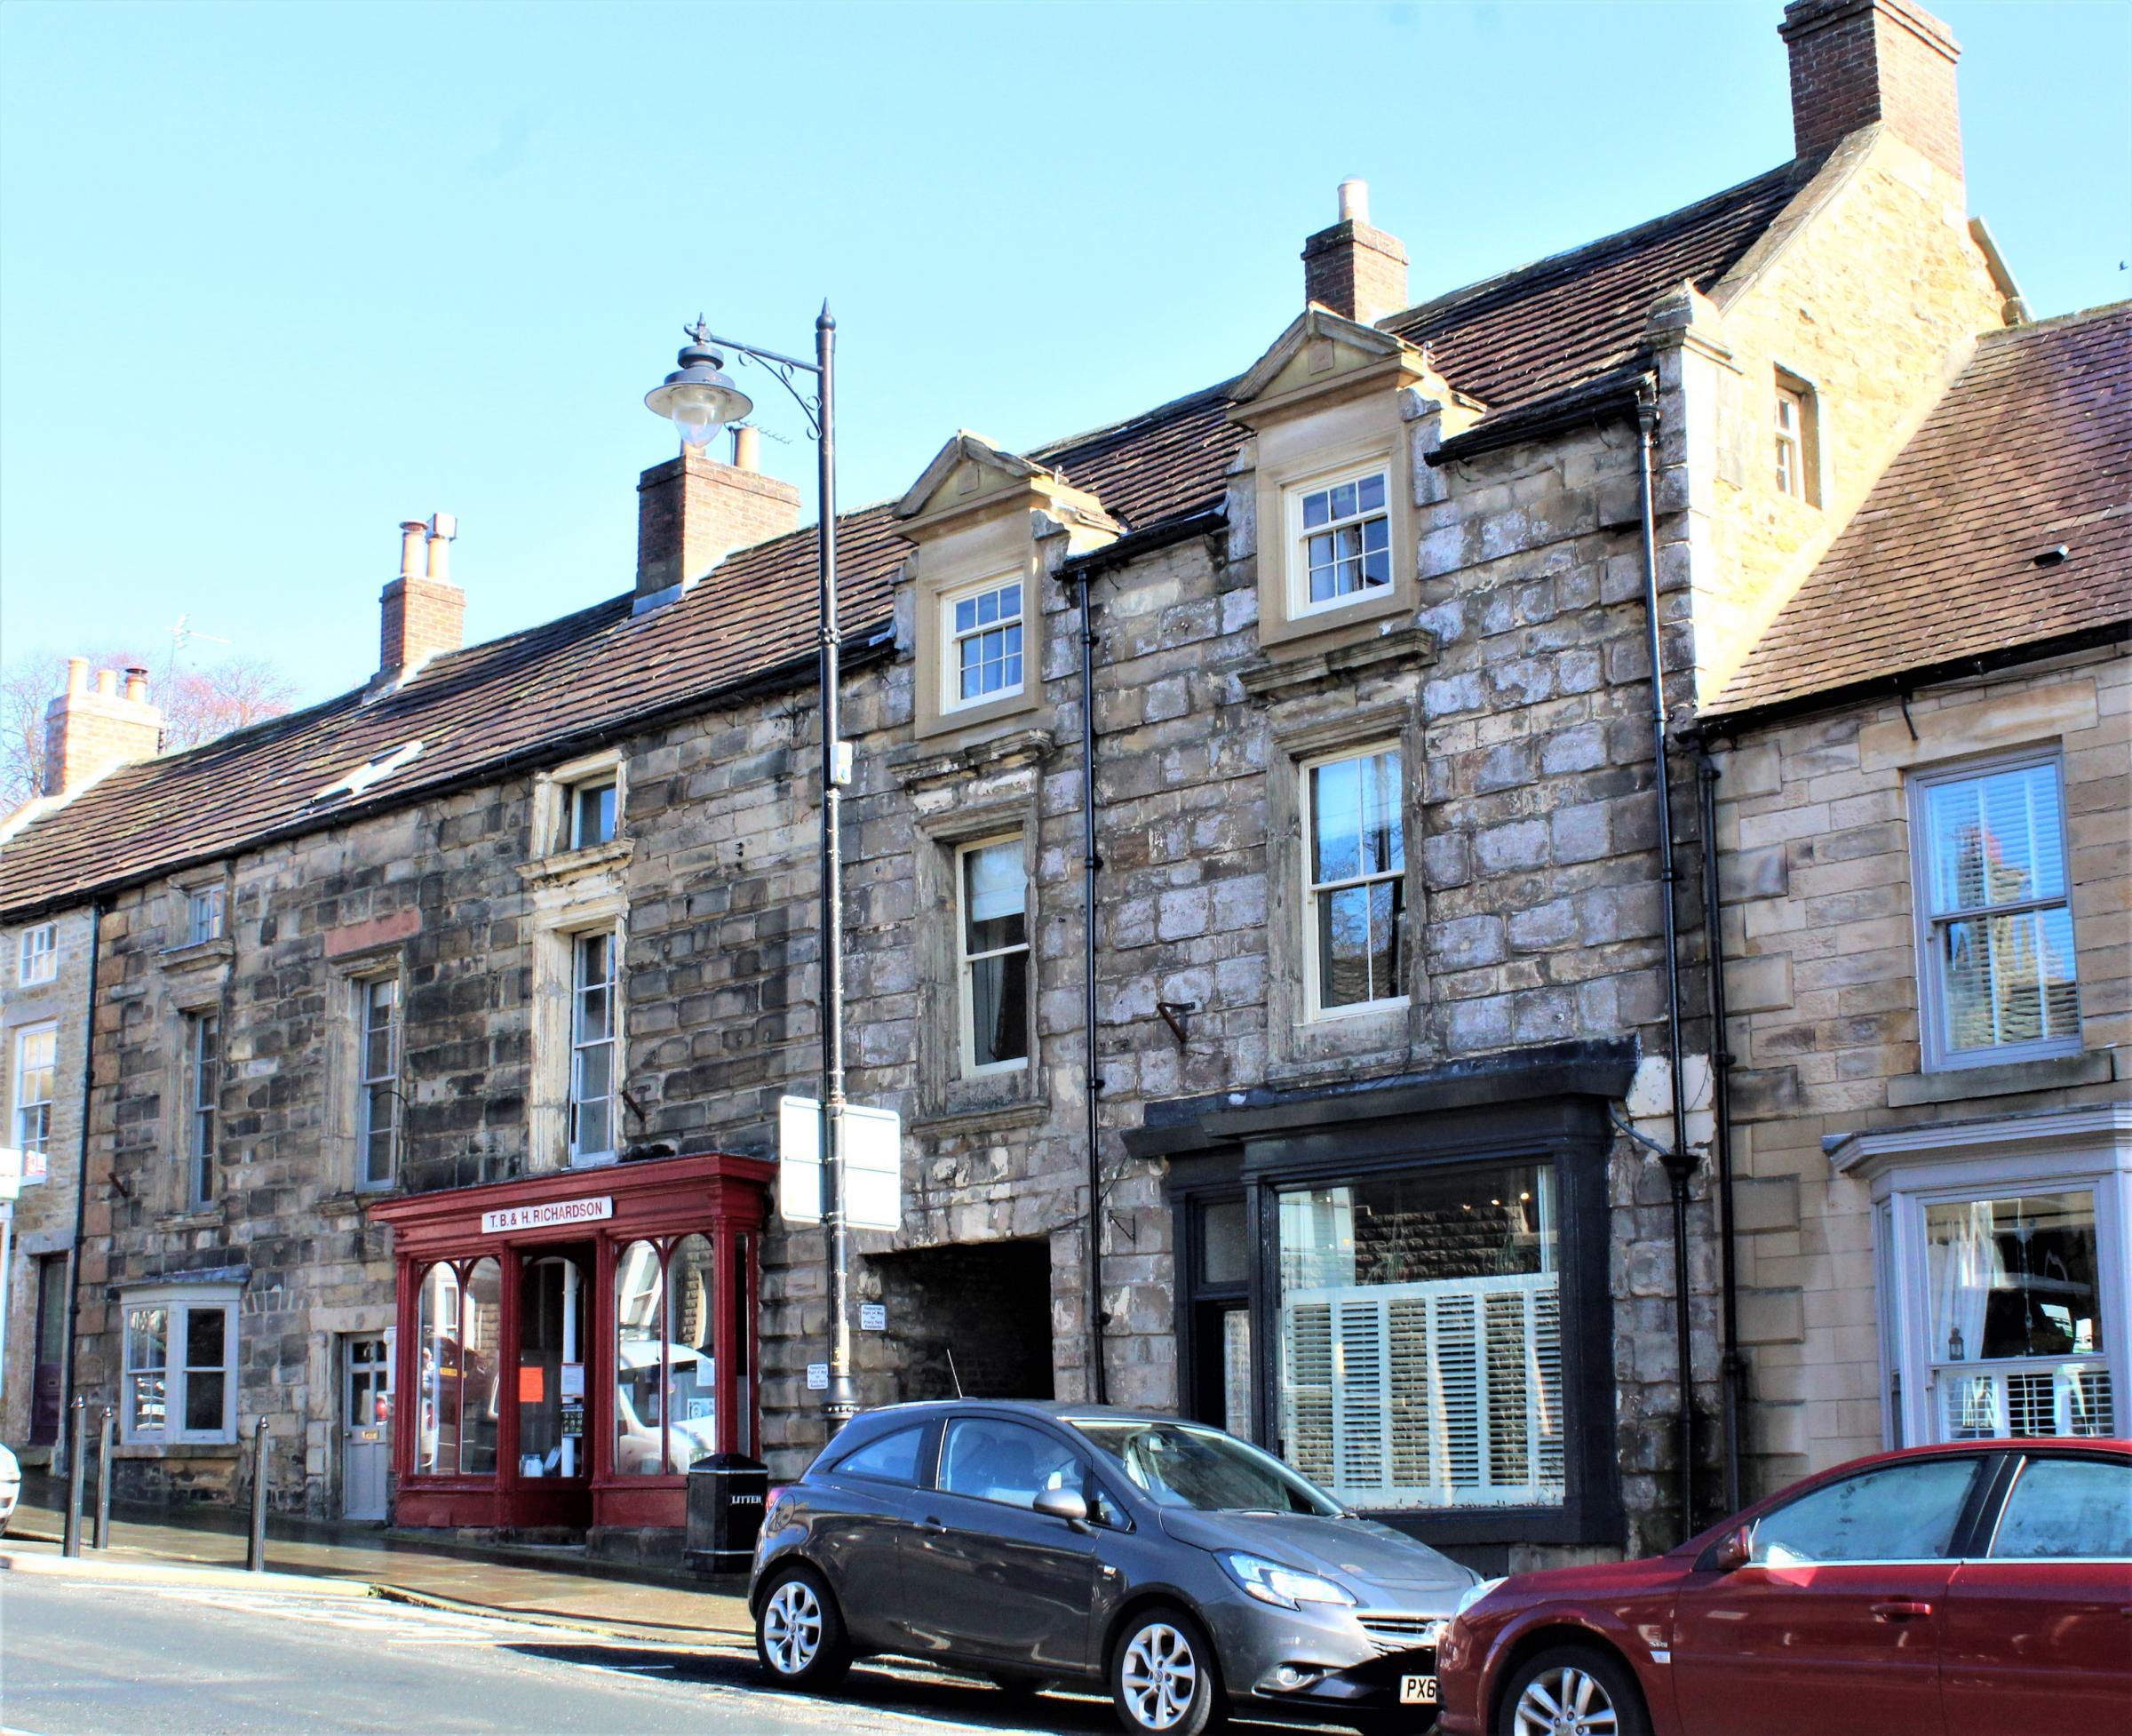 The Old Manor House at the bottom of the bank in Barnard Castle